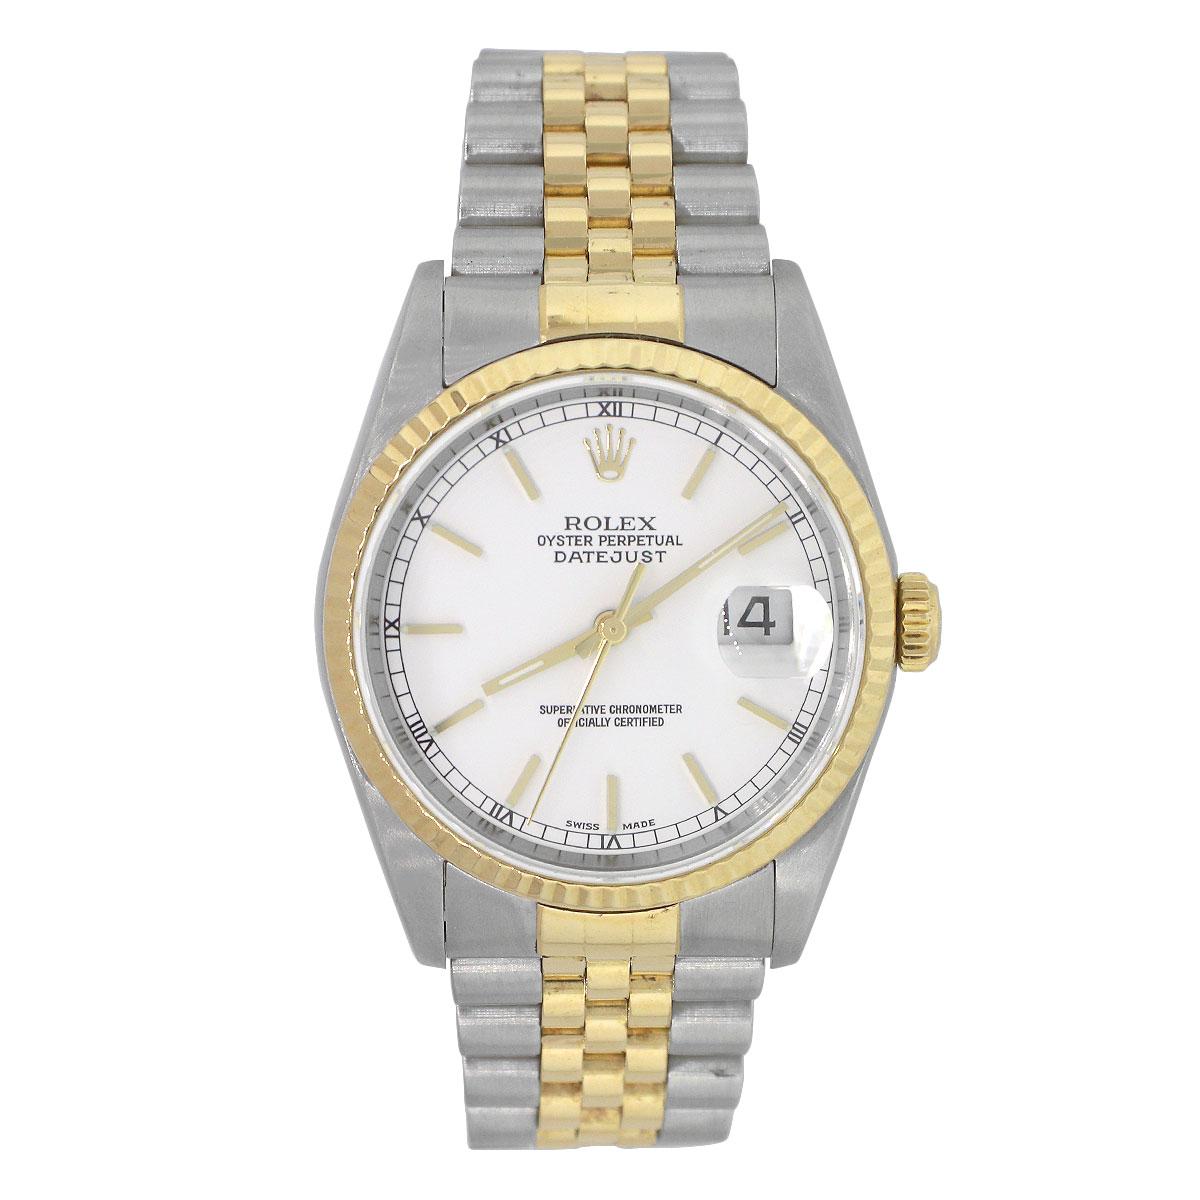 Brand: Rolex
MPN: 16233
Model: Datejust
Case Material: Stainless steel with no holes
Case Diameter: 36mm
Crystal: Sapphire Crystal
Bezel: 18k yellow gold fluted bezel
Dial: White Dial with yellow gold hands and stick markers. Date can be found at 3